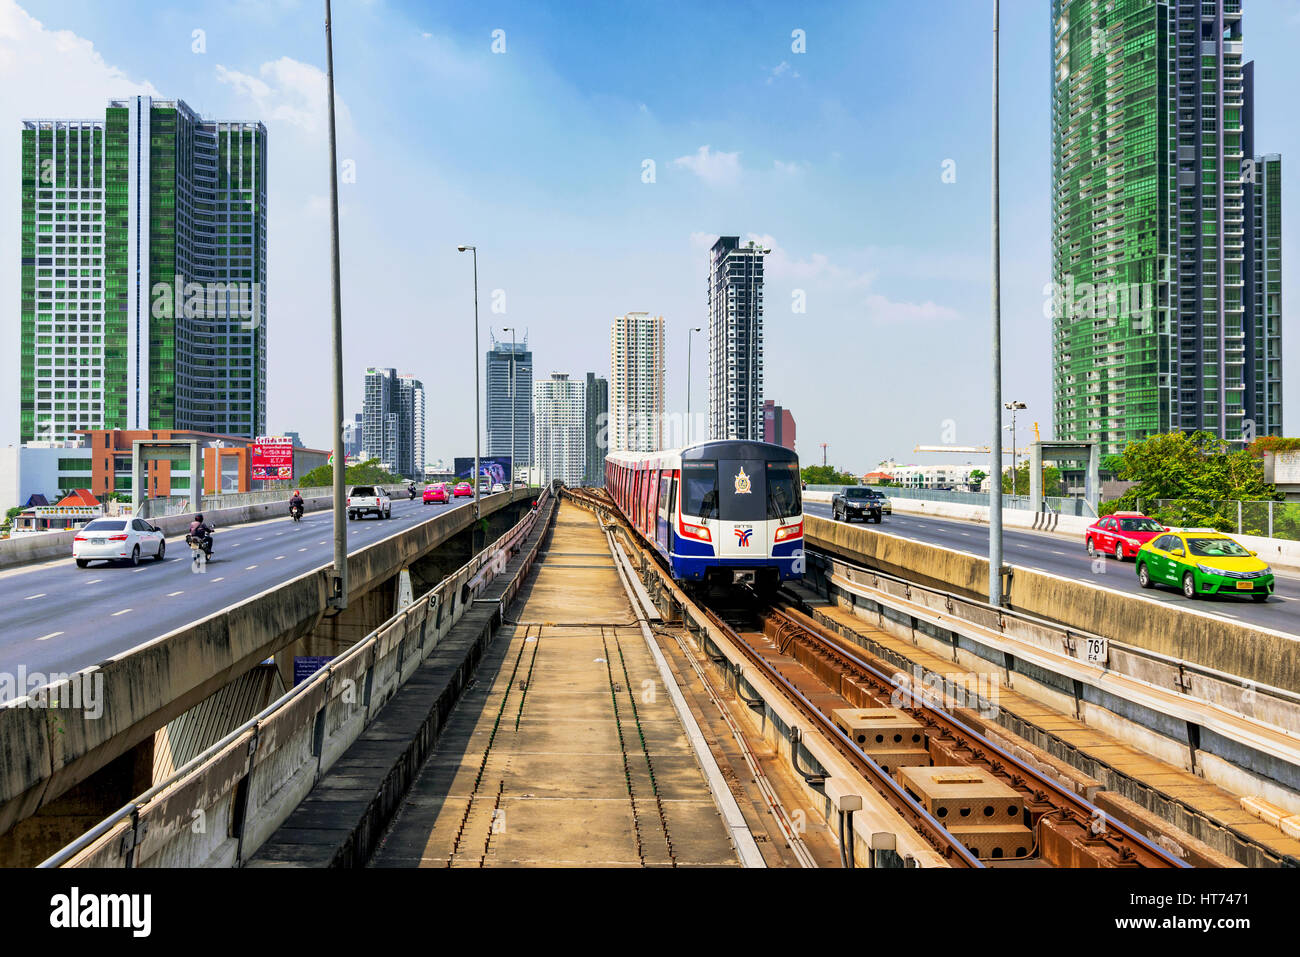 BANGKOK, THAILAND - JANUARY 30: BTS Sky train arriving in Saphan Taksin station on Taksin bridge with city buildings and roads on each side on January Stock Photo